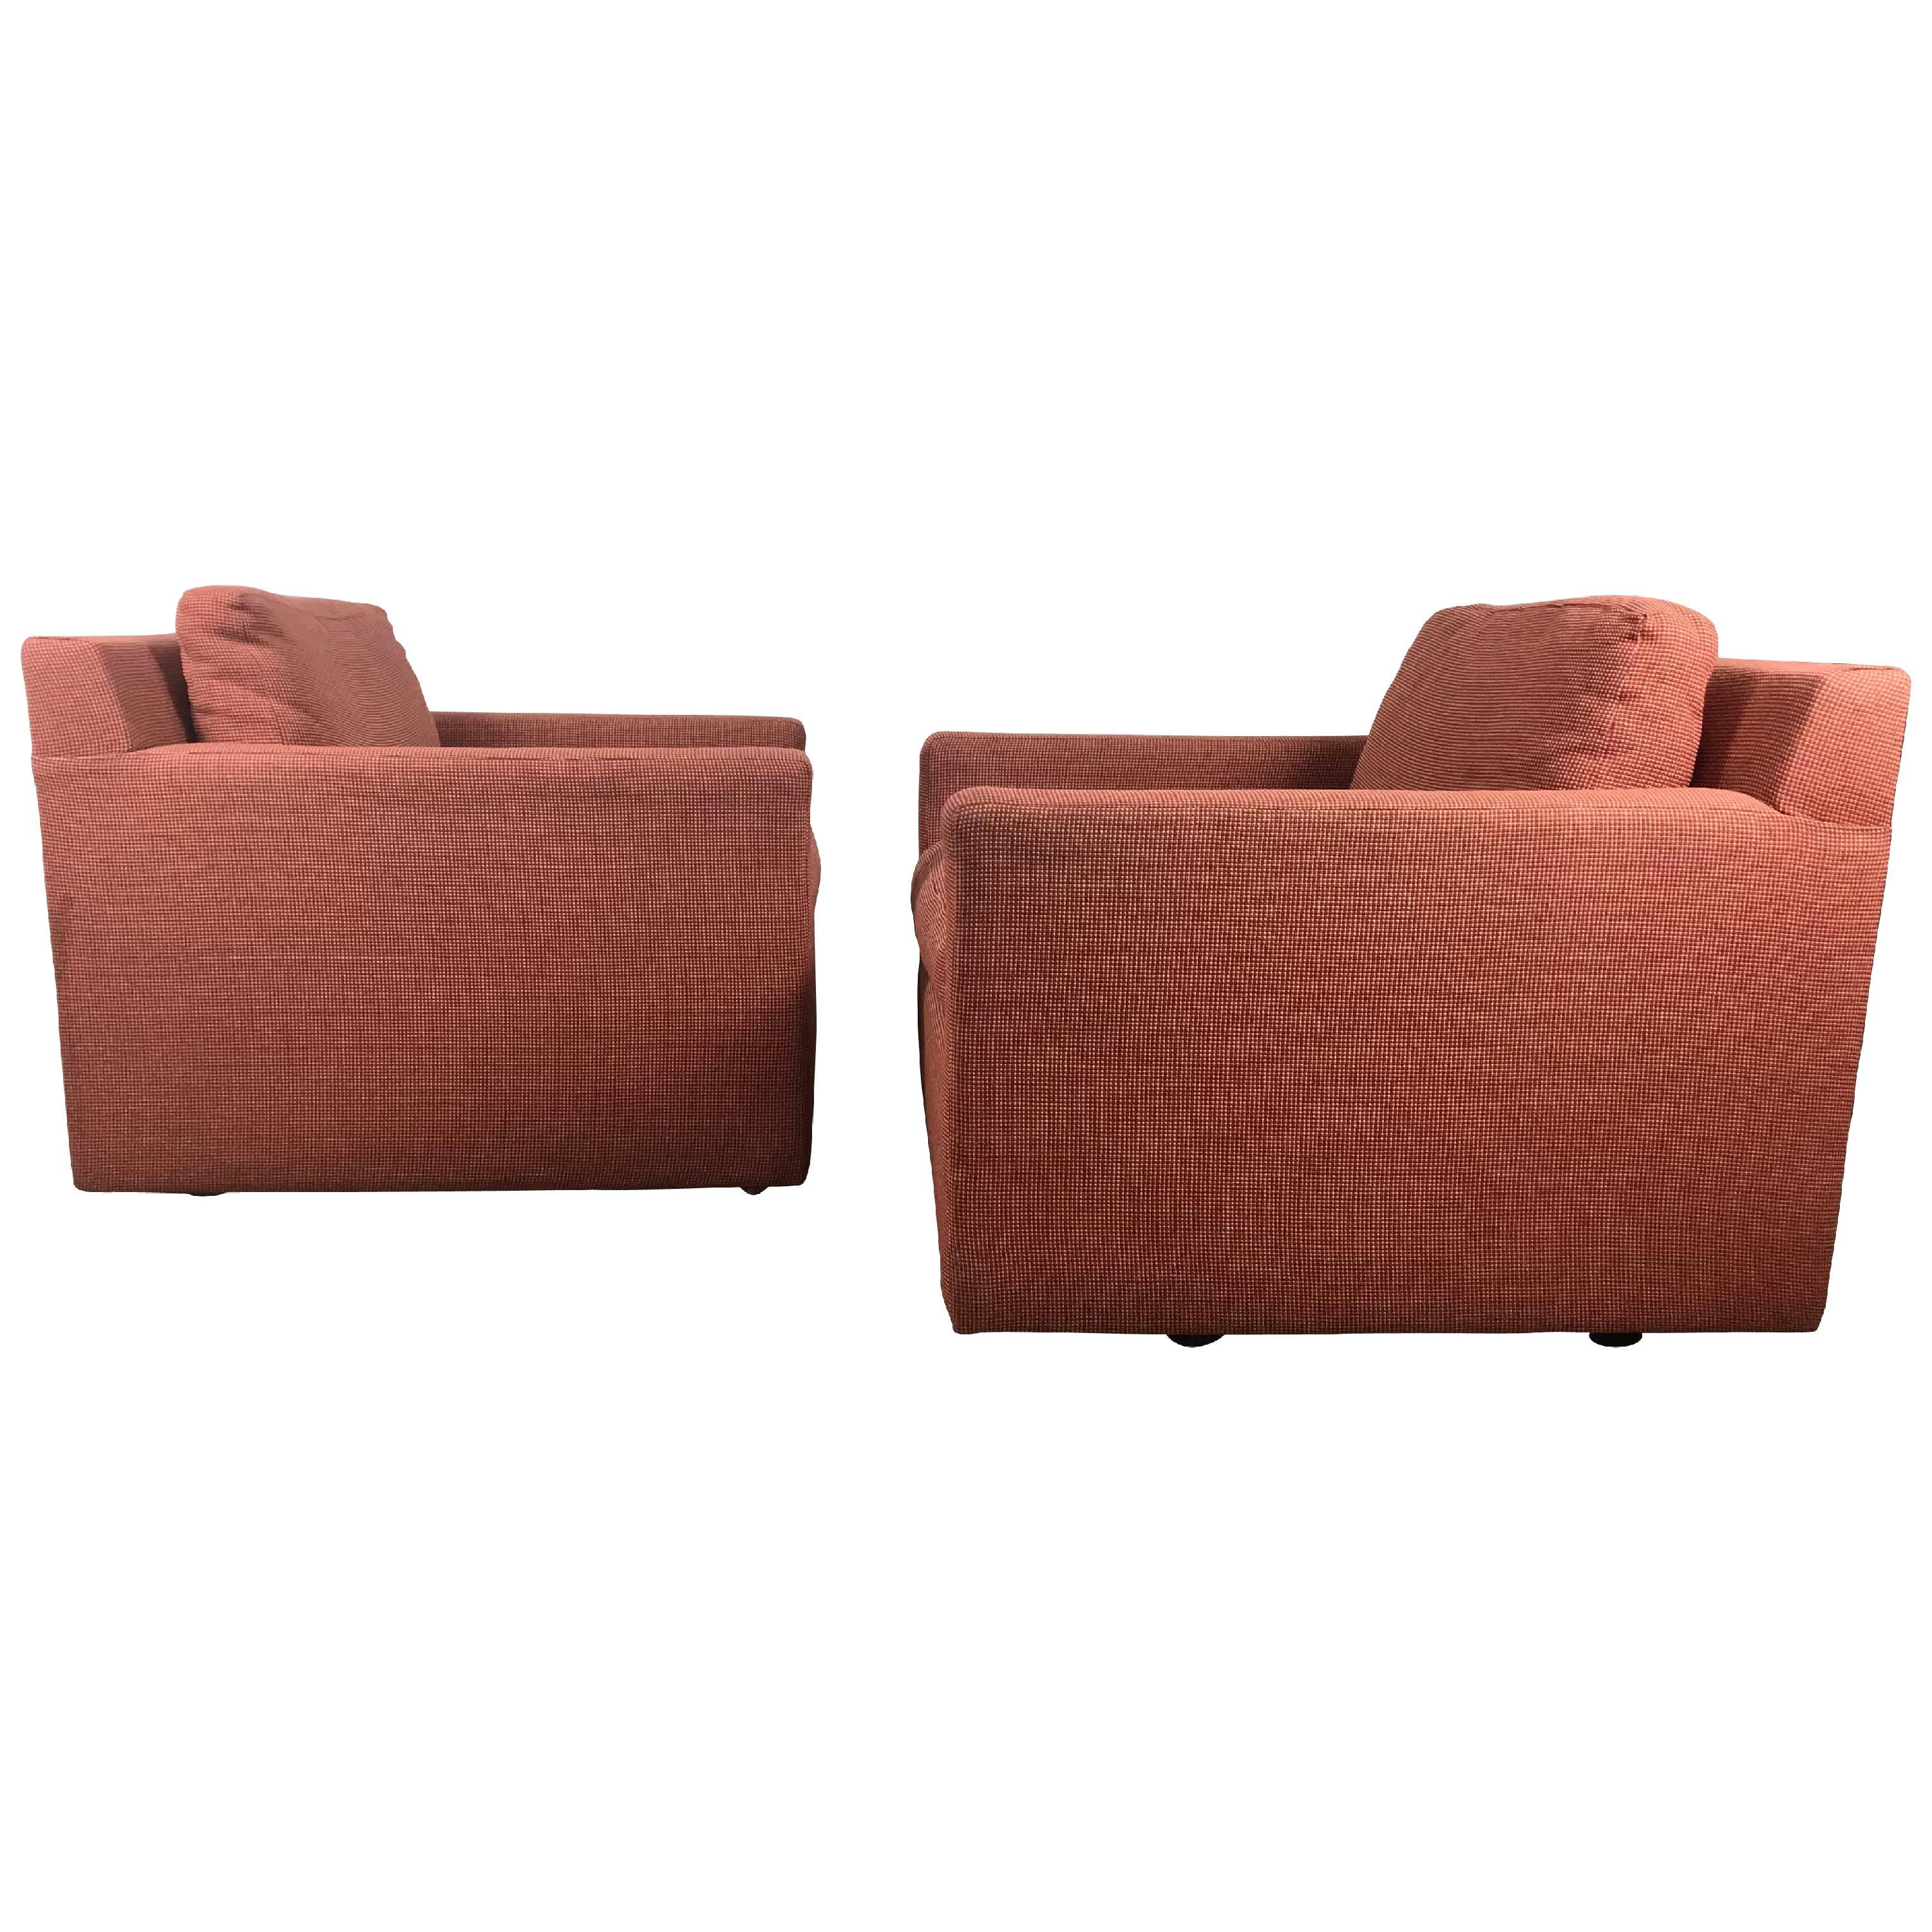 Stunning Pair of Cube Lounge Chairs Attributed to Milo Baughman